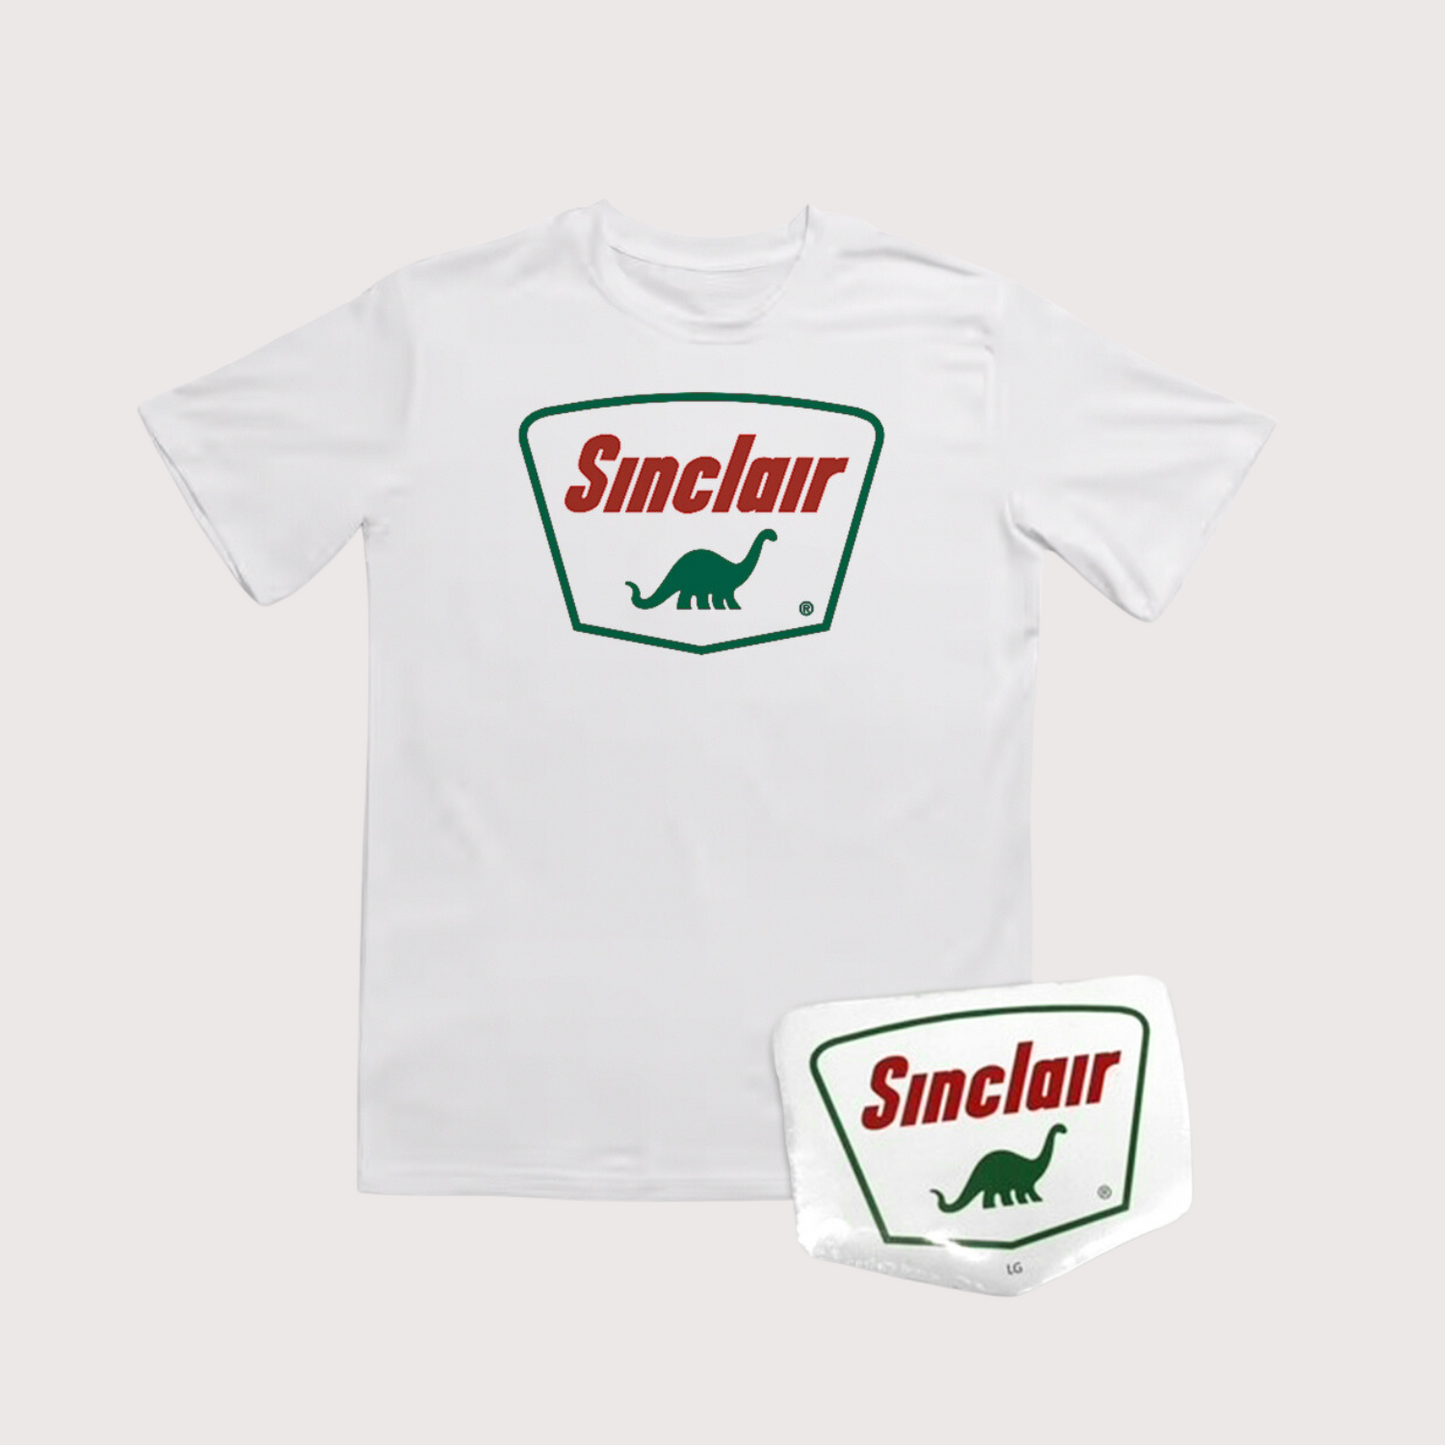 Sinclair Compressed T-shirt